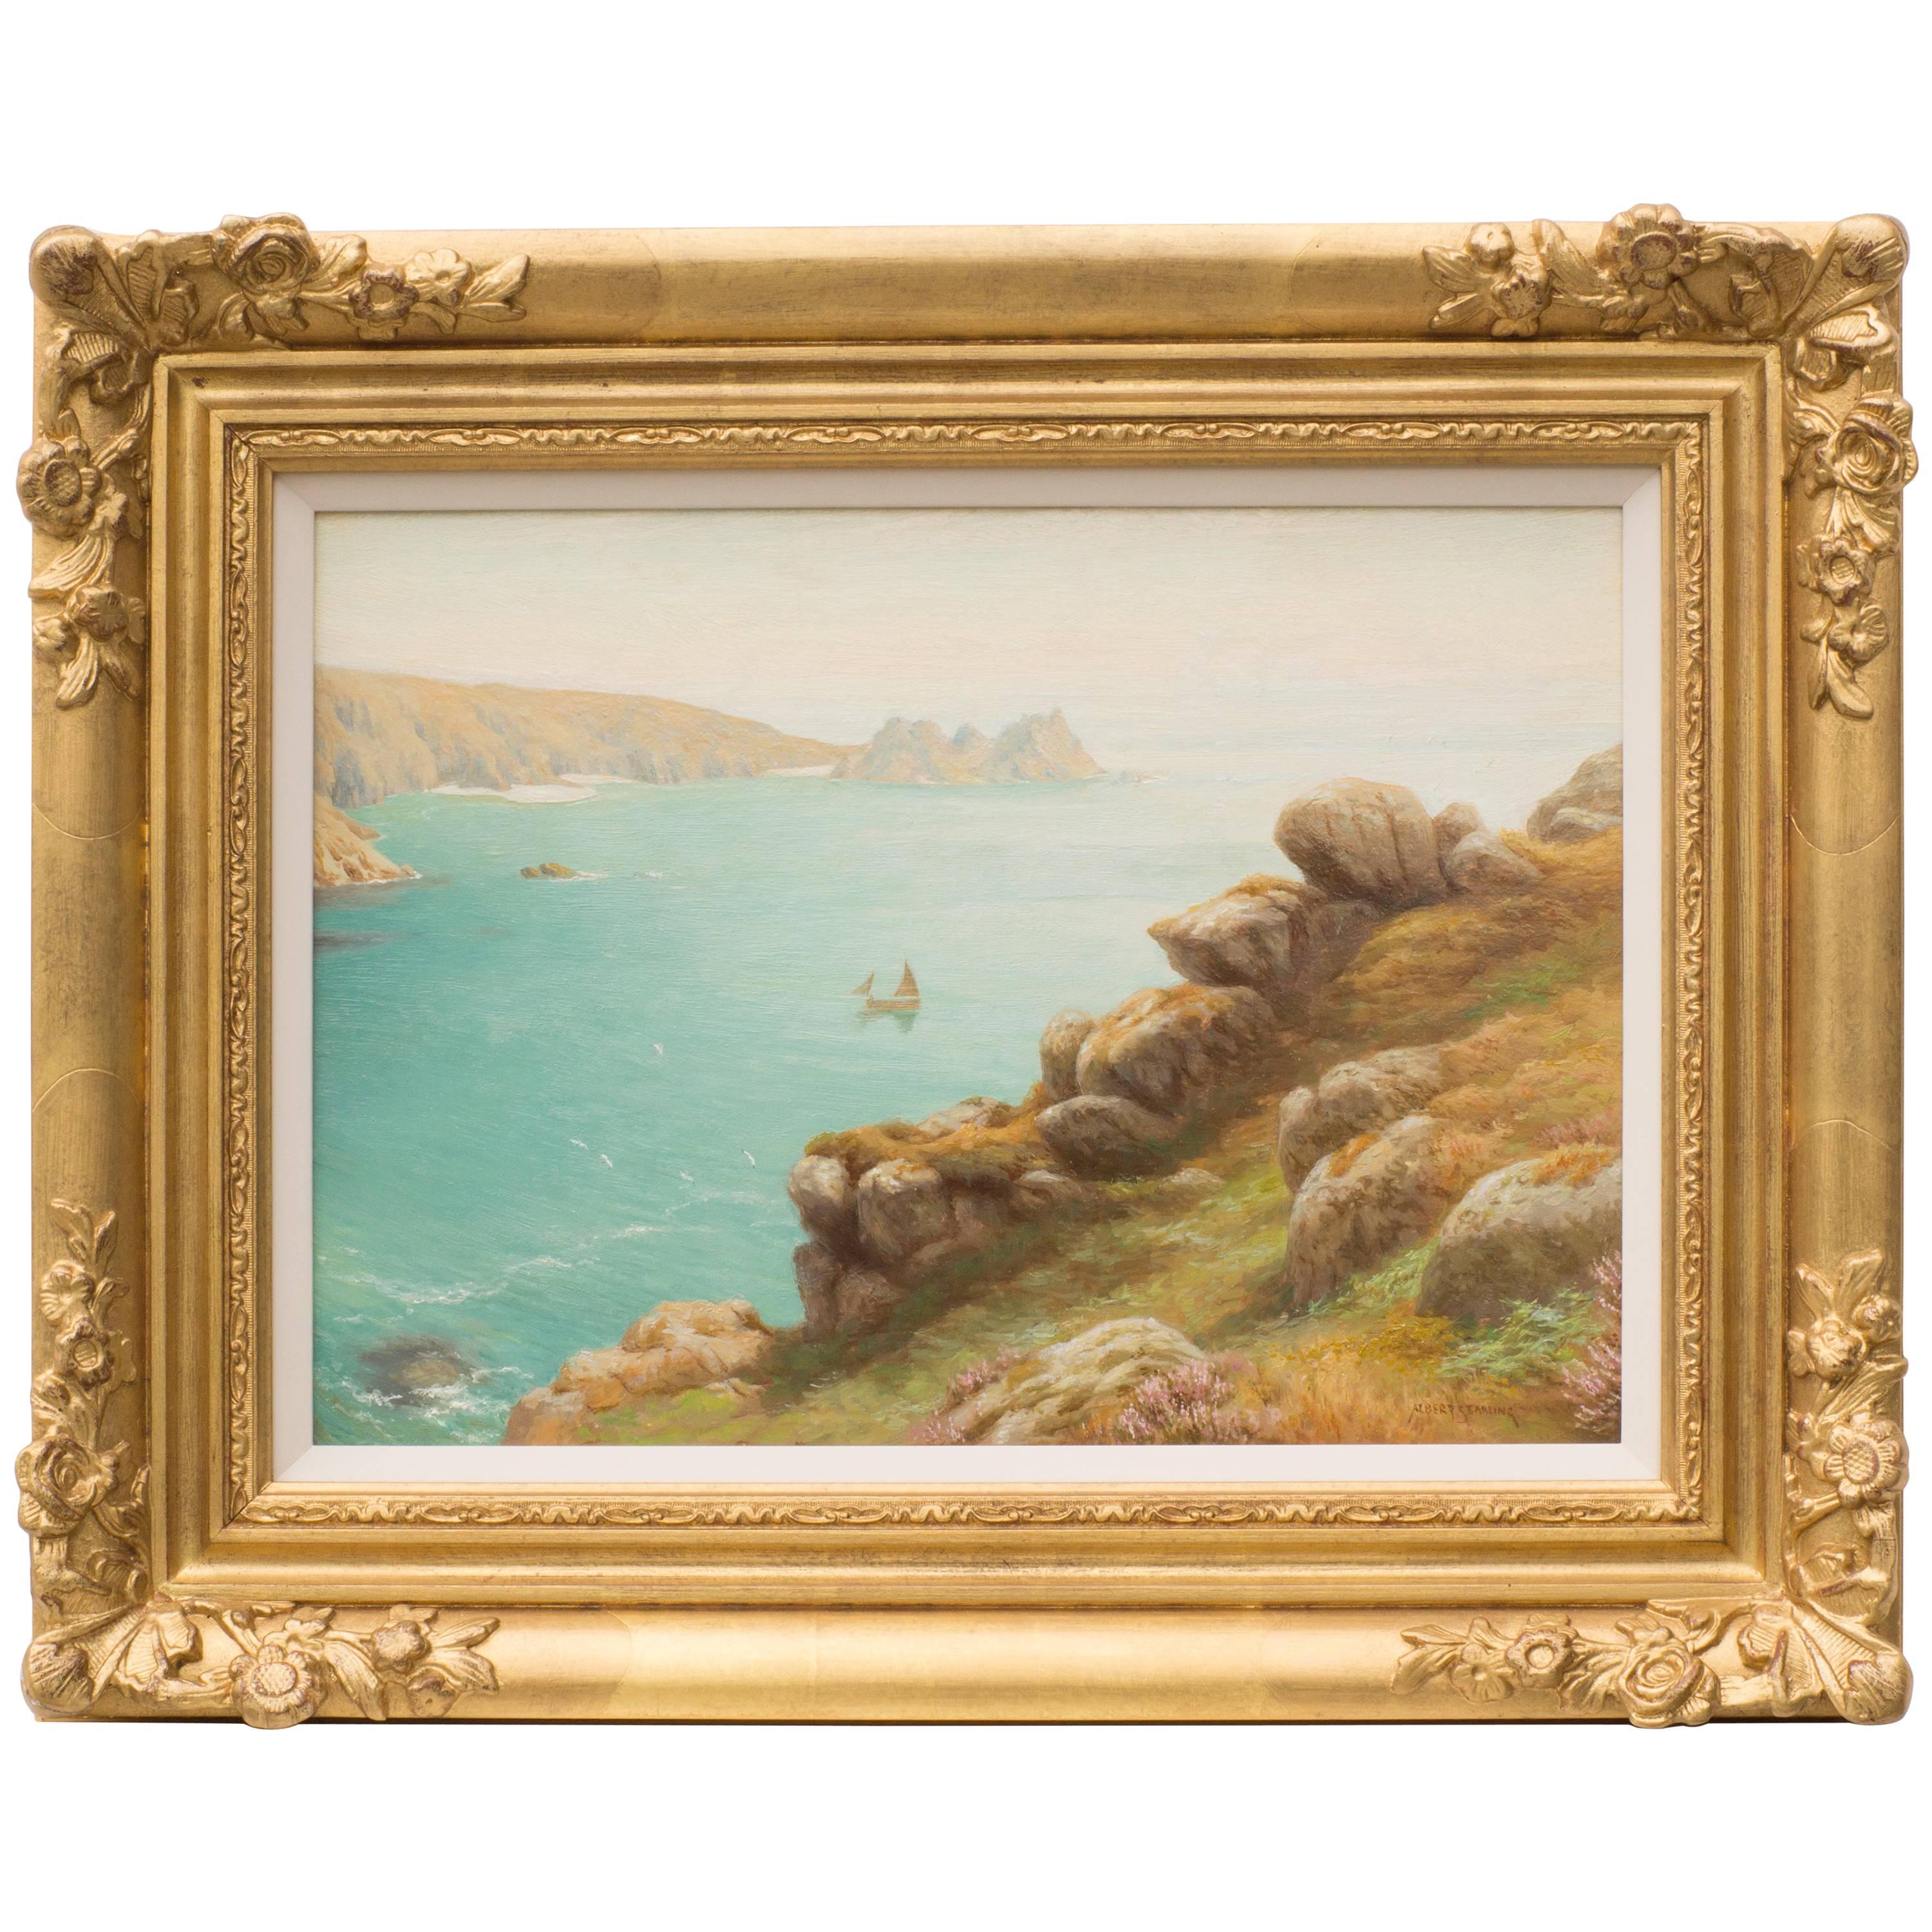 Porthcurno Bay, an Landscape Painting by Albert Starling For Sale